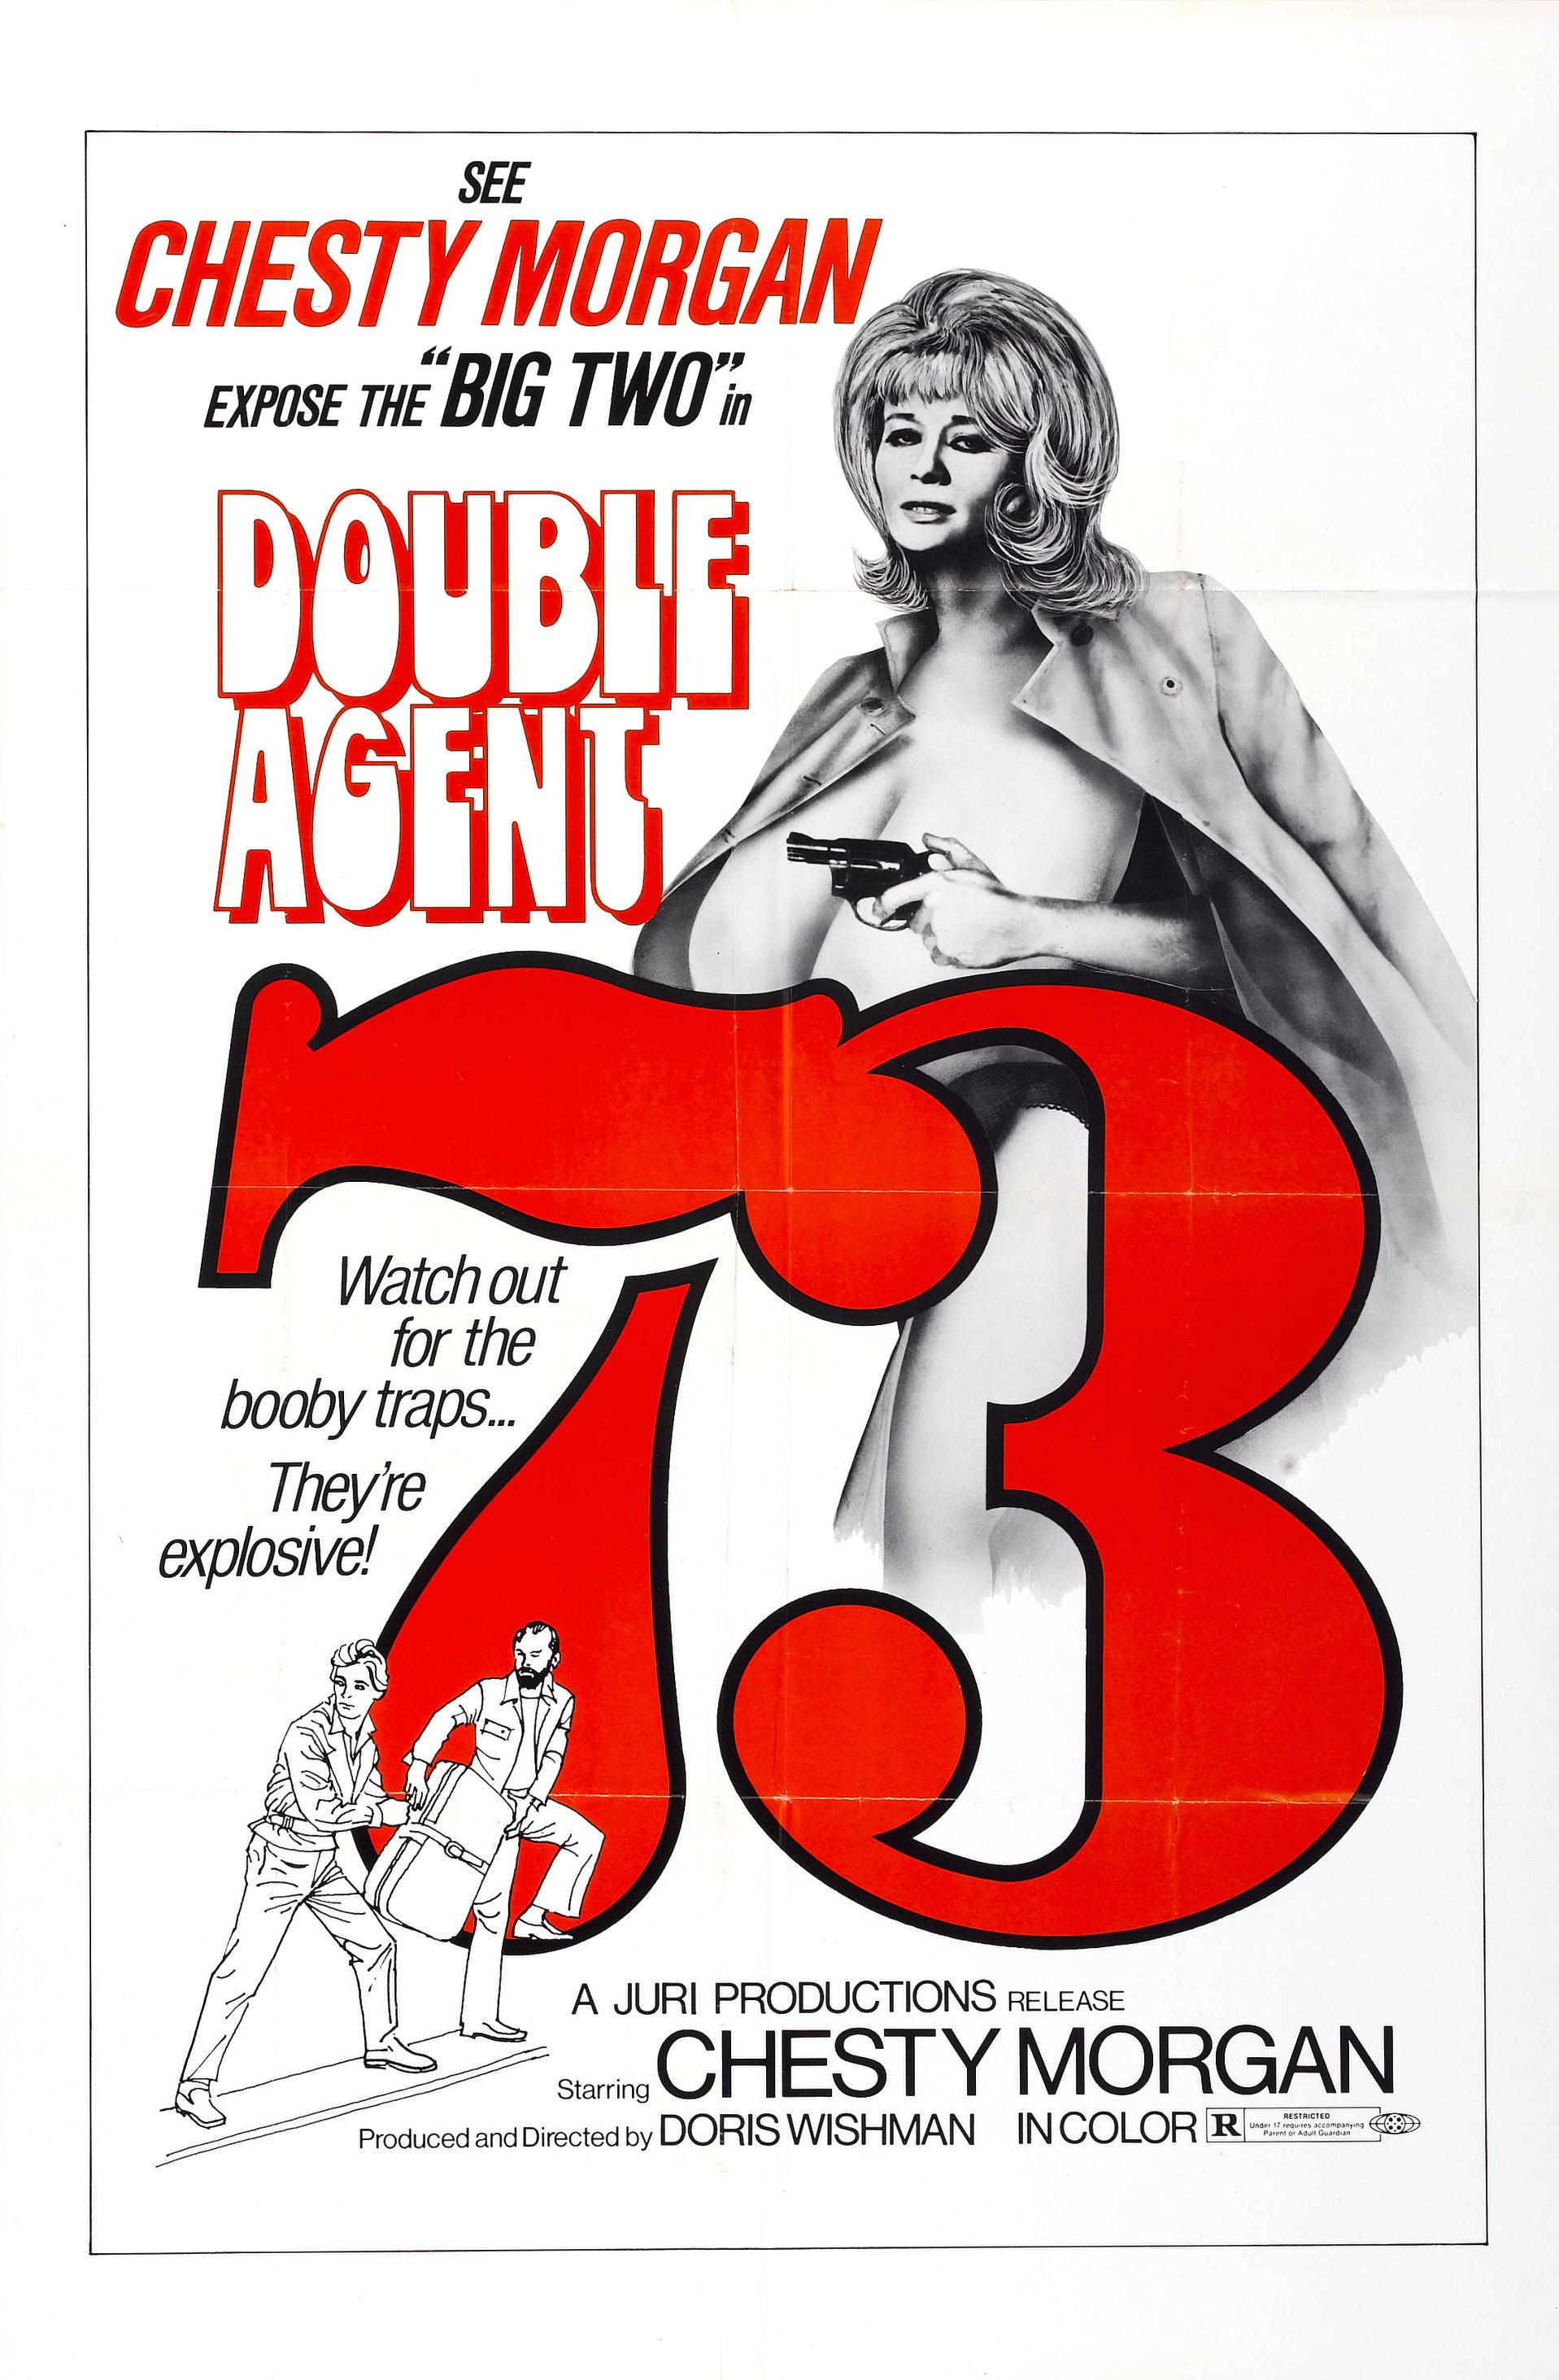 Double Agent 73 (1974) starring Chesty Morgan on DVD on DVD